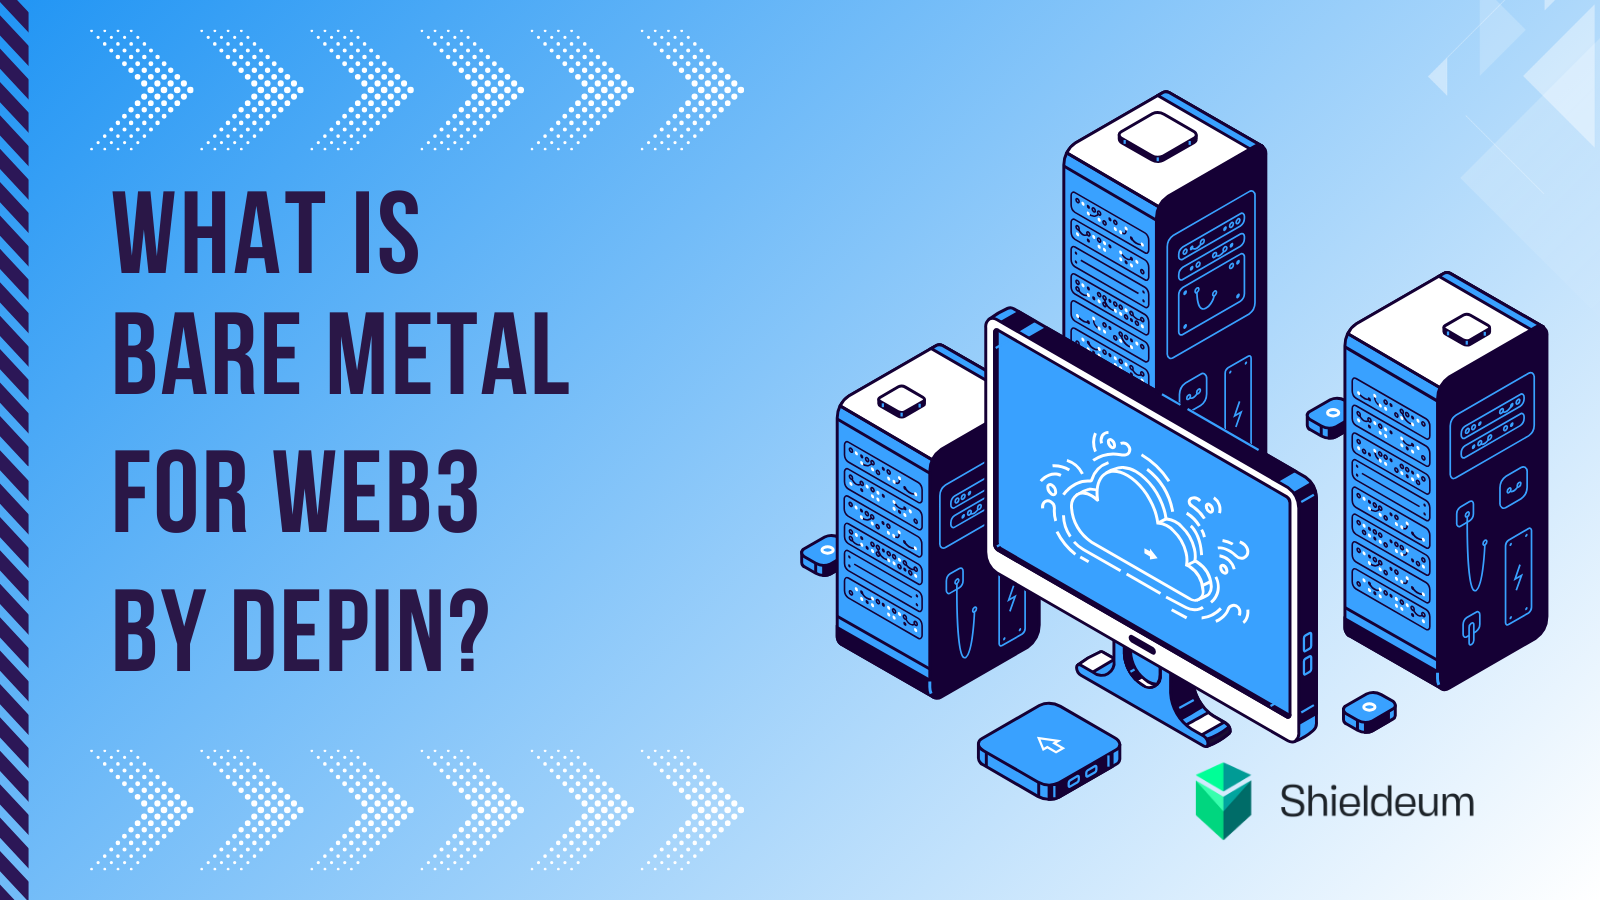 What is Bare Metal for Web3 produced by a DePIN?